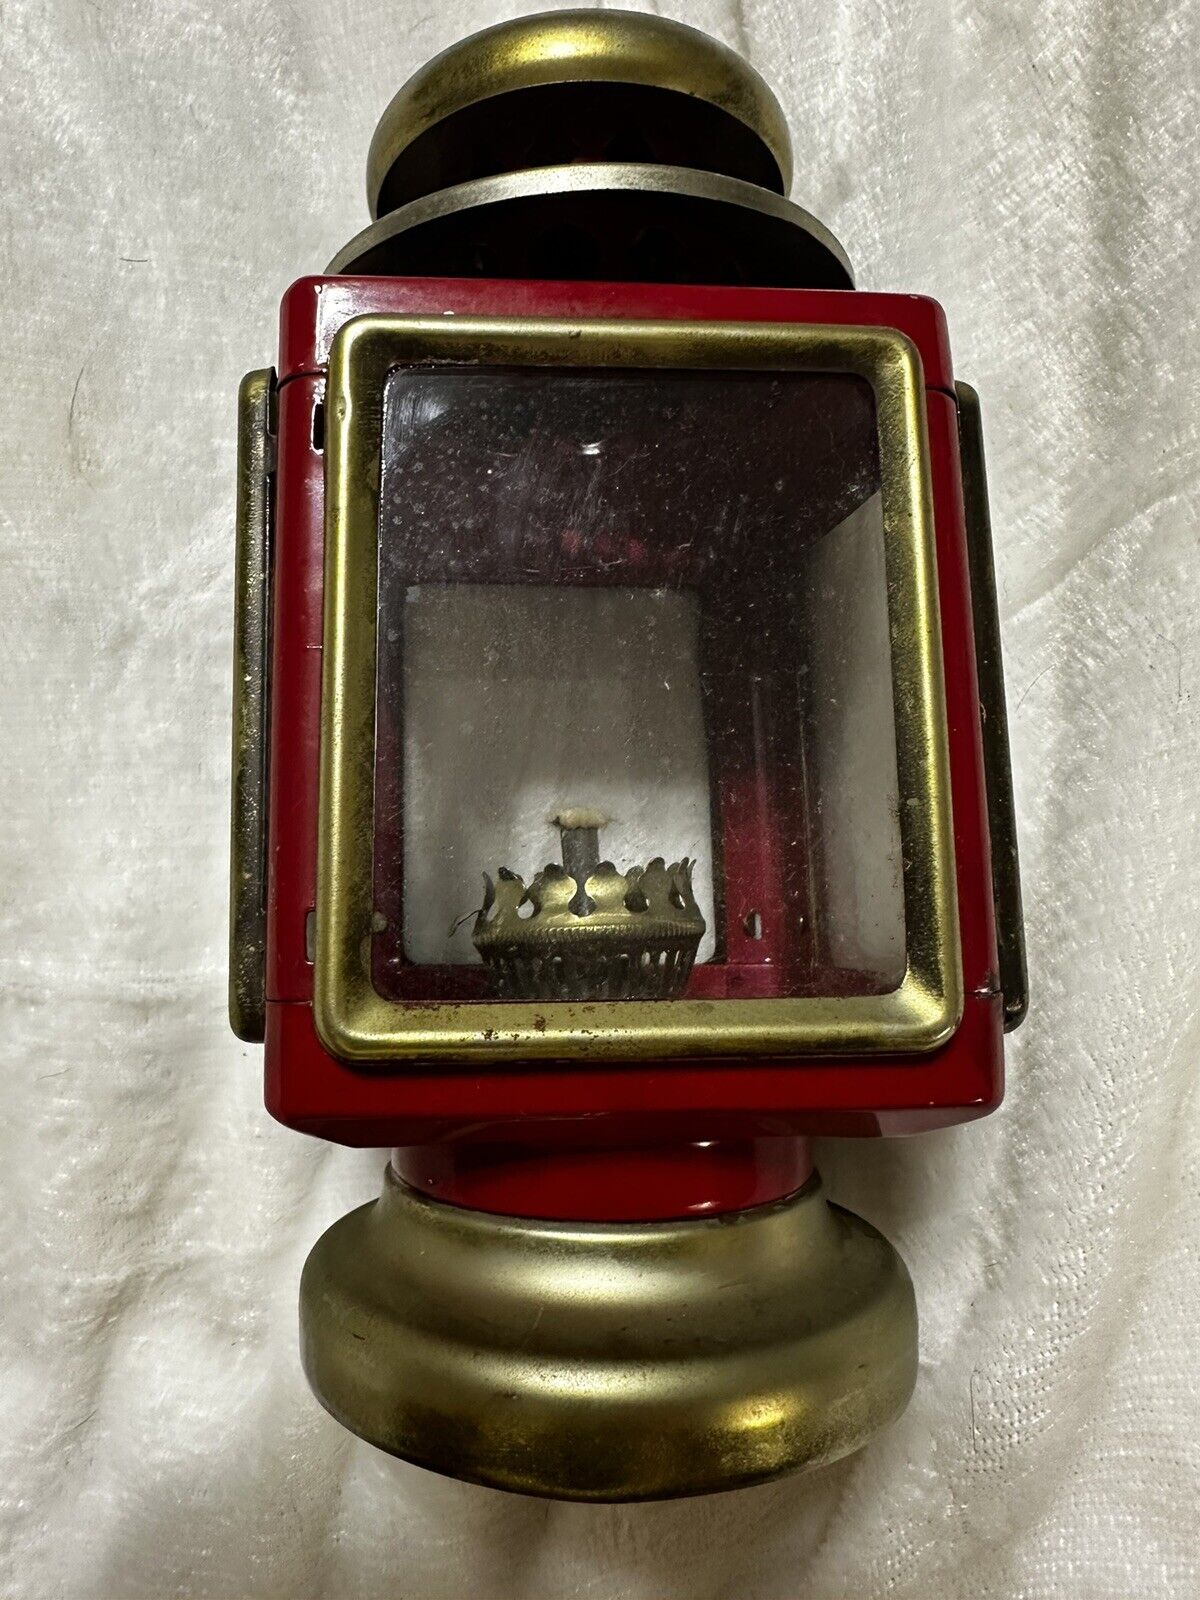 Vintage 1960s Red Metal And Brass Glass Oil Lamp Lantern Carriage Light